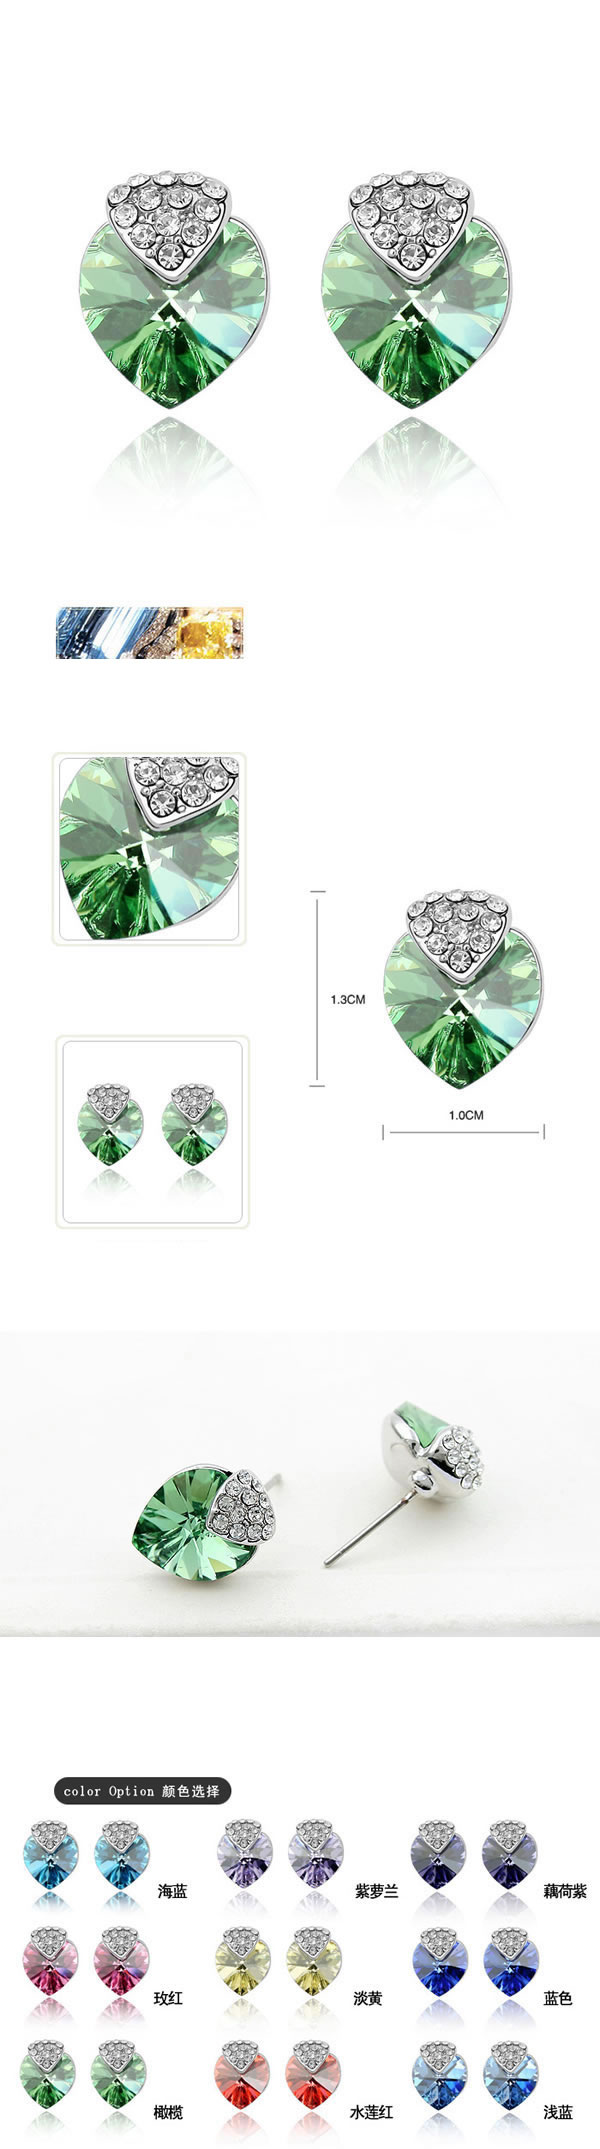 Stronglite olive Green Earrings Alloy Crystal Earrings,Crystal Earrings